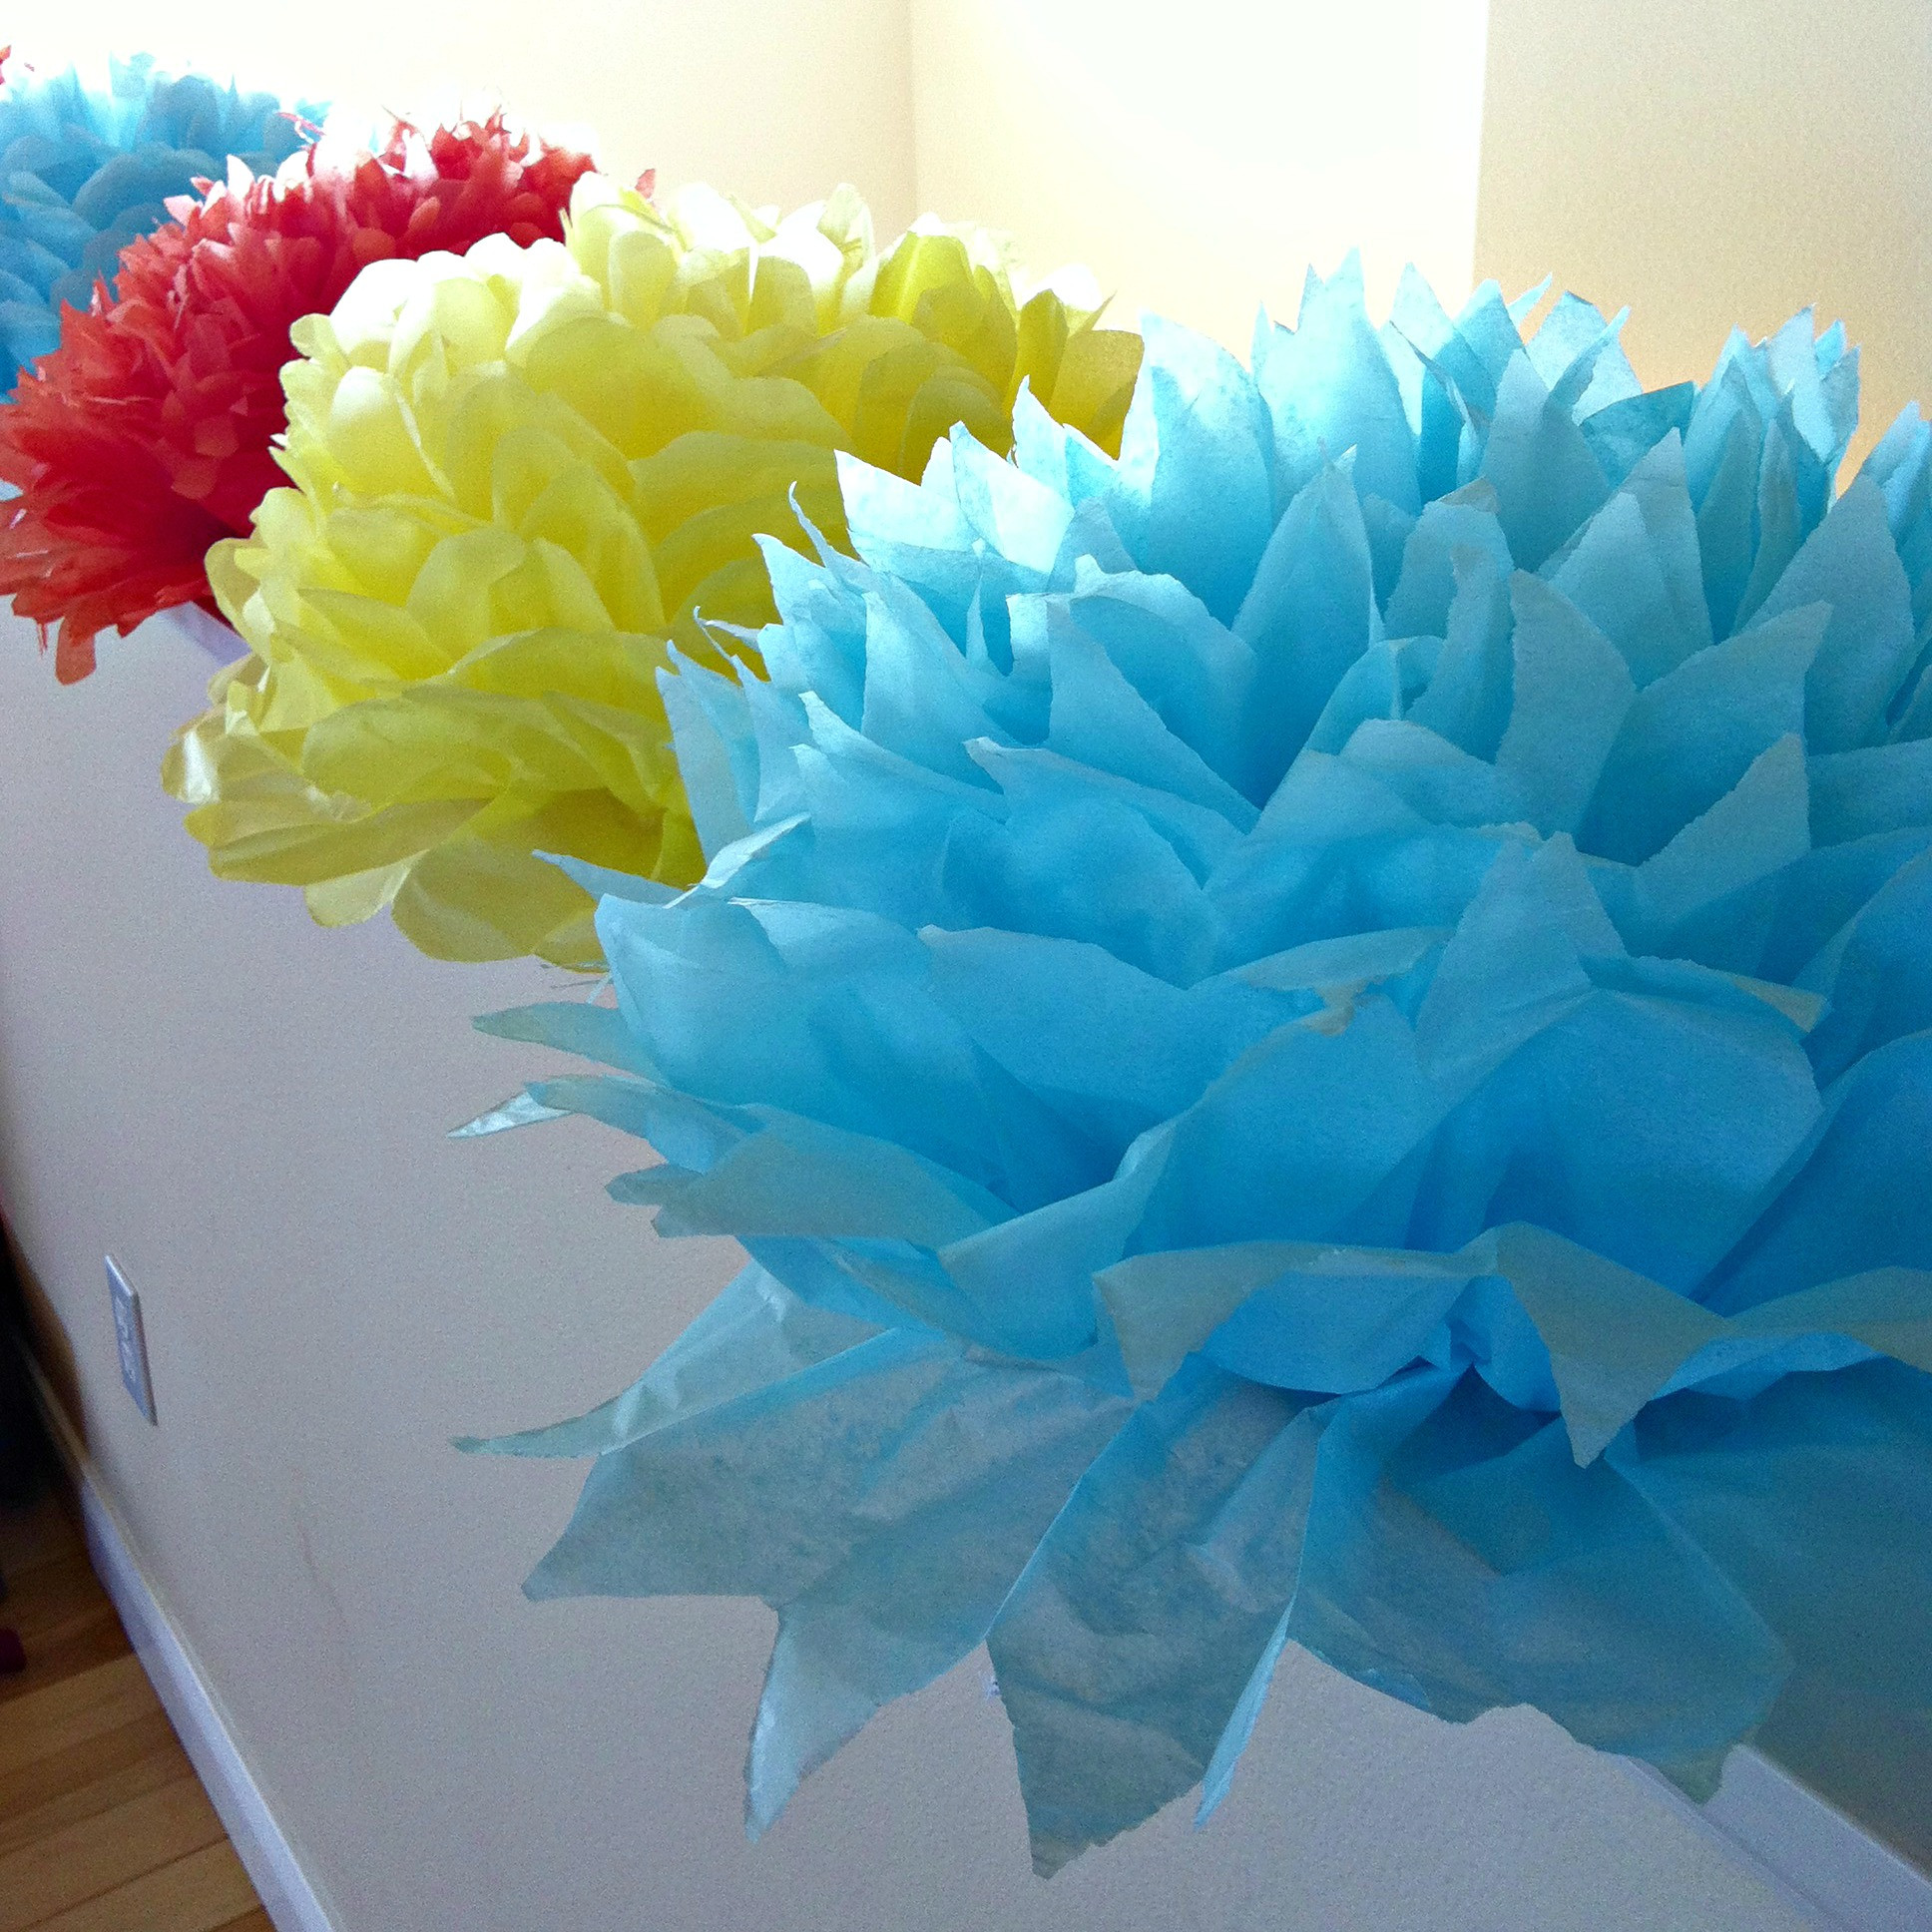 Tissue Paper Decorations DIY
 Tutorial How To Make DIY Giant Tissue Paper Flowers Sew